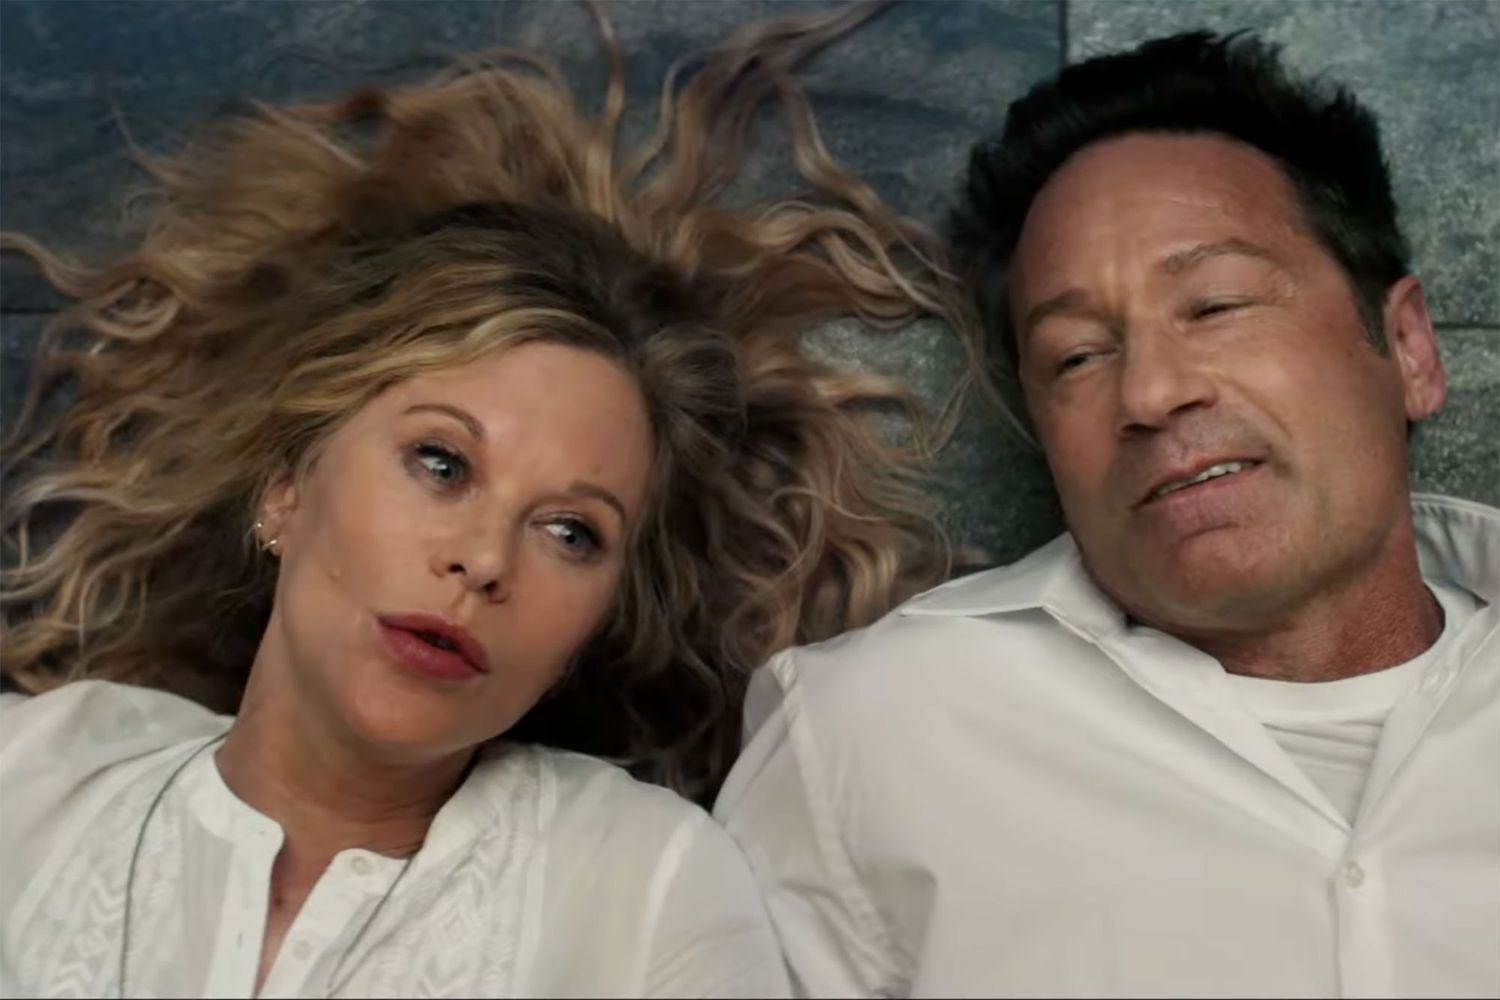 ‘What Happens Later’ Trailer: Meg Ryan Directs And Stars With David Duchovny In New Rom-Com This October